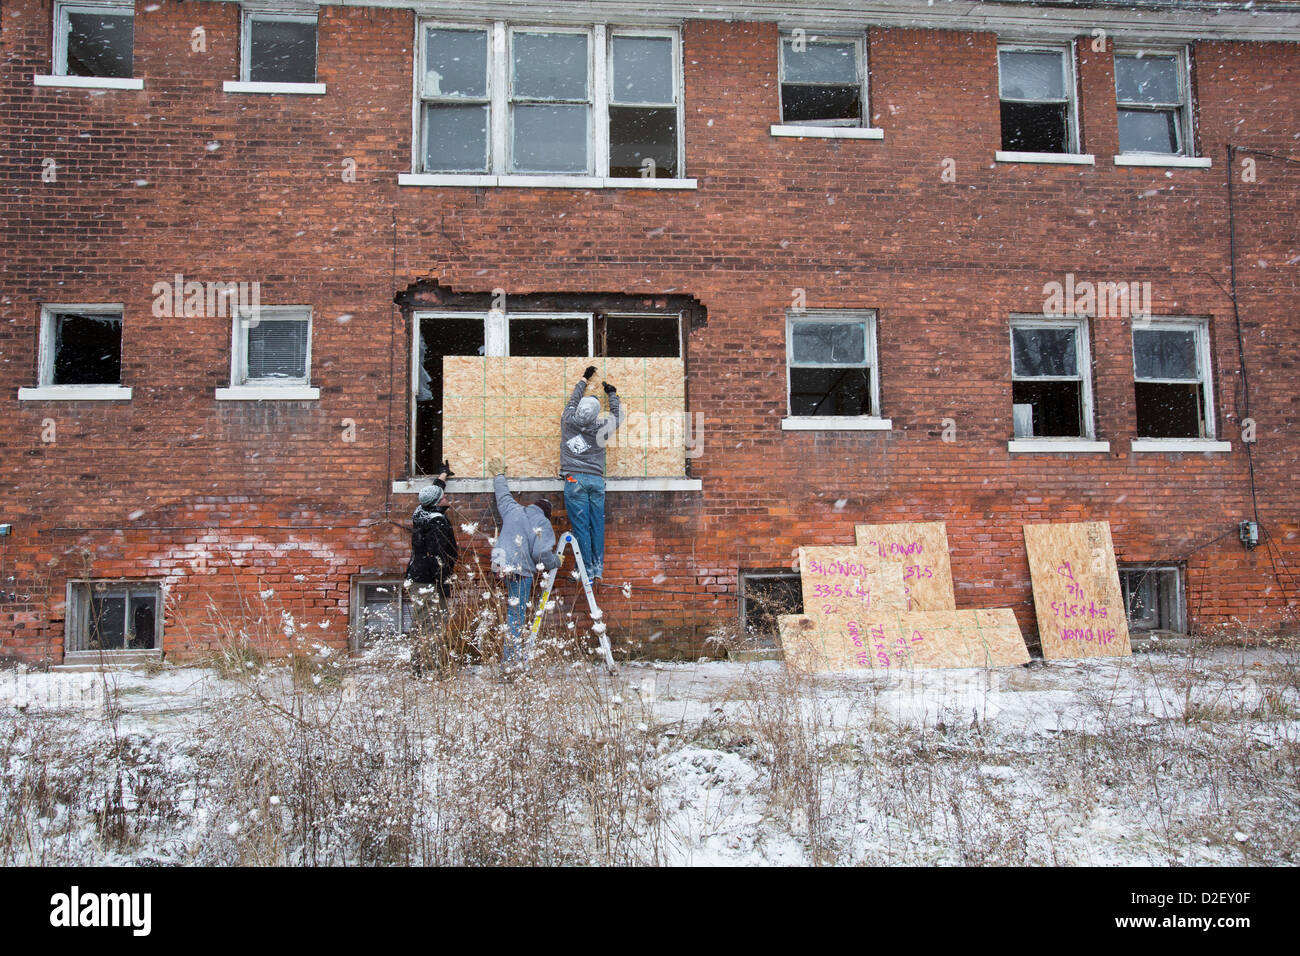 On Martin Luther King Jr. Day, volunteers from Wayne State University and neighborhood residents boarded up abandoned houses. Stock Photo